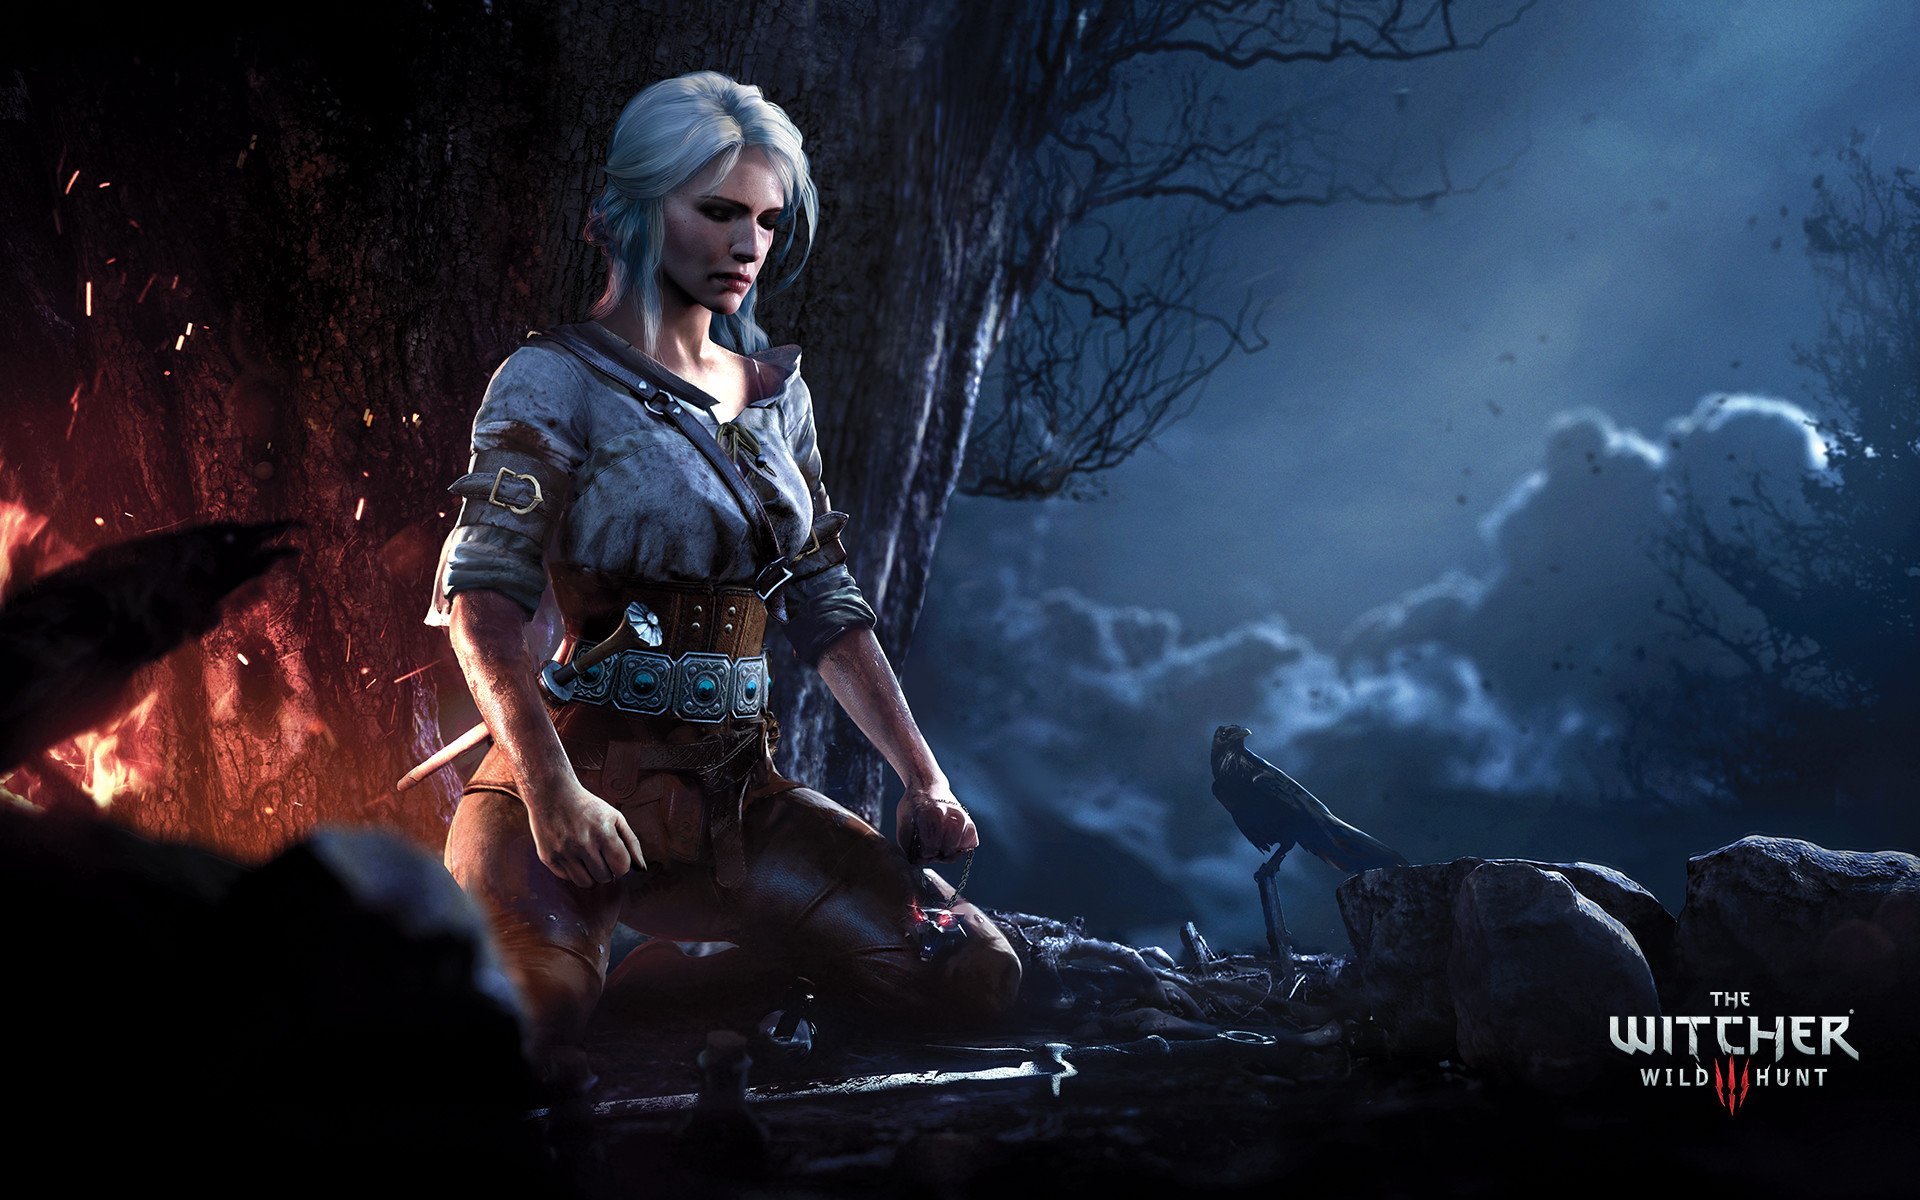 The Witcher Wild Hunt Ciri Wallpapers HD Wallpapers